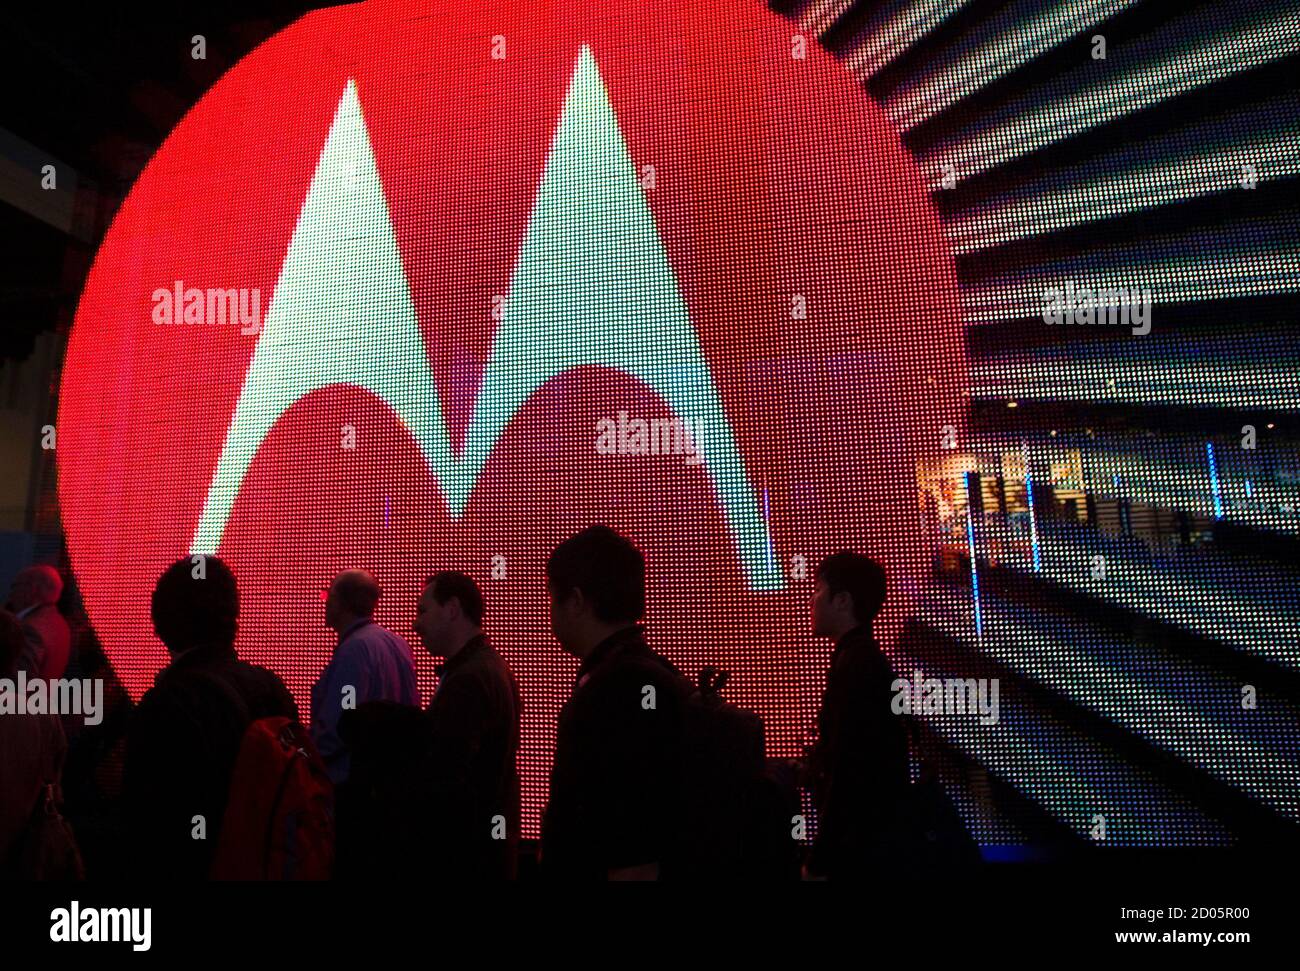 People pass by the Motorola booth during the 2011 International Consumer Electronics Show (CES) in Las Vegas, Nevada January 7, 2011. The annual Consumer Electronics Show in Las Vegas from Jan. 6-9 showcases the tablets, 3D- and Internet-enabled TVs expected to make the biggest splash in 2011. The battle for recession-weary consumers will pit Samsung Electronics, Sony Corp, LG Electronics, Google Inc, Netflix and Apple Inc against each other, all fighting to make their technology the standard.  REUTERS/Steve Marcus (UNITED STATES - Tags: BUSINESS IMAGES OF THE DAY) Stock Photo